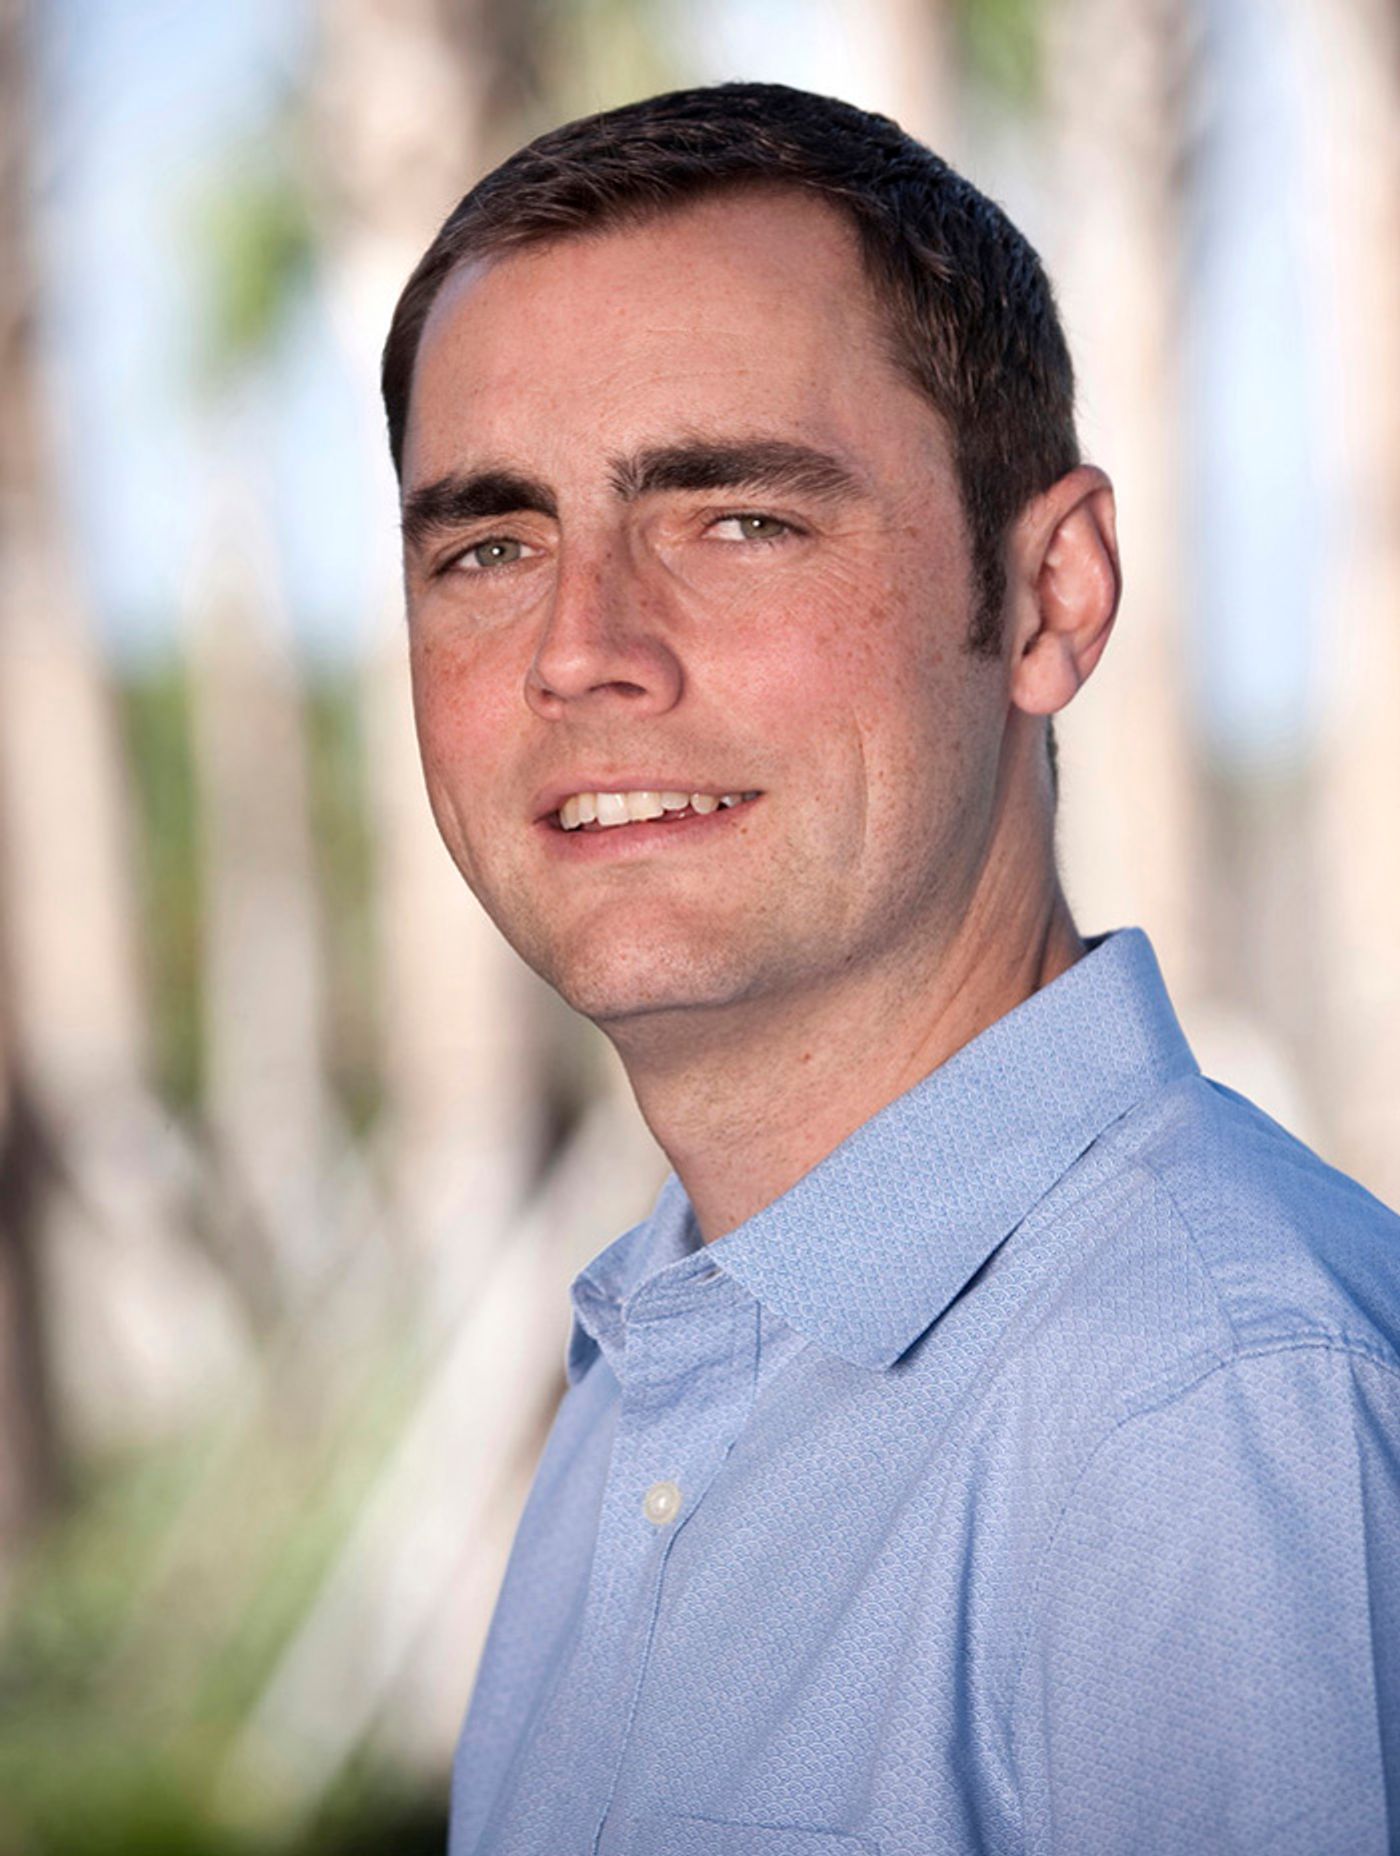 Brian M. Paegel is an associate professor at the Florida campus of The Scripps Research Institute.